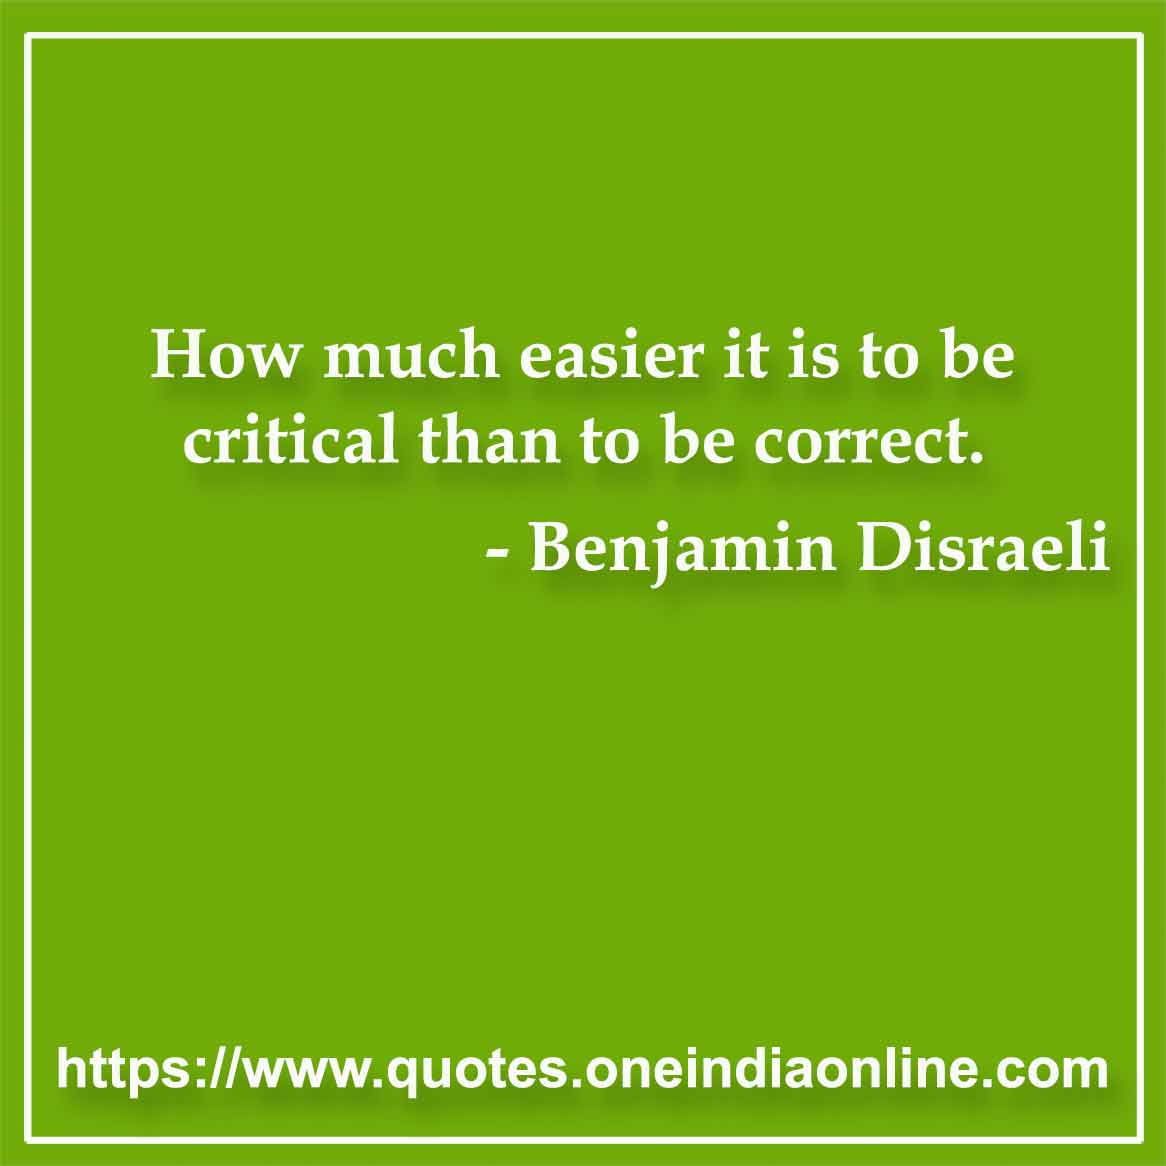 How much easier it is to be critical than to be correct.

- Criticism Quotes by Benjamin Disraeli